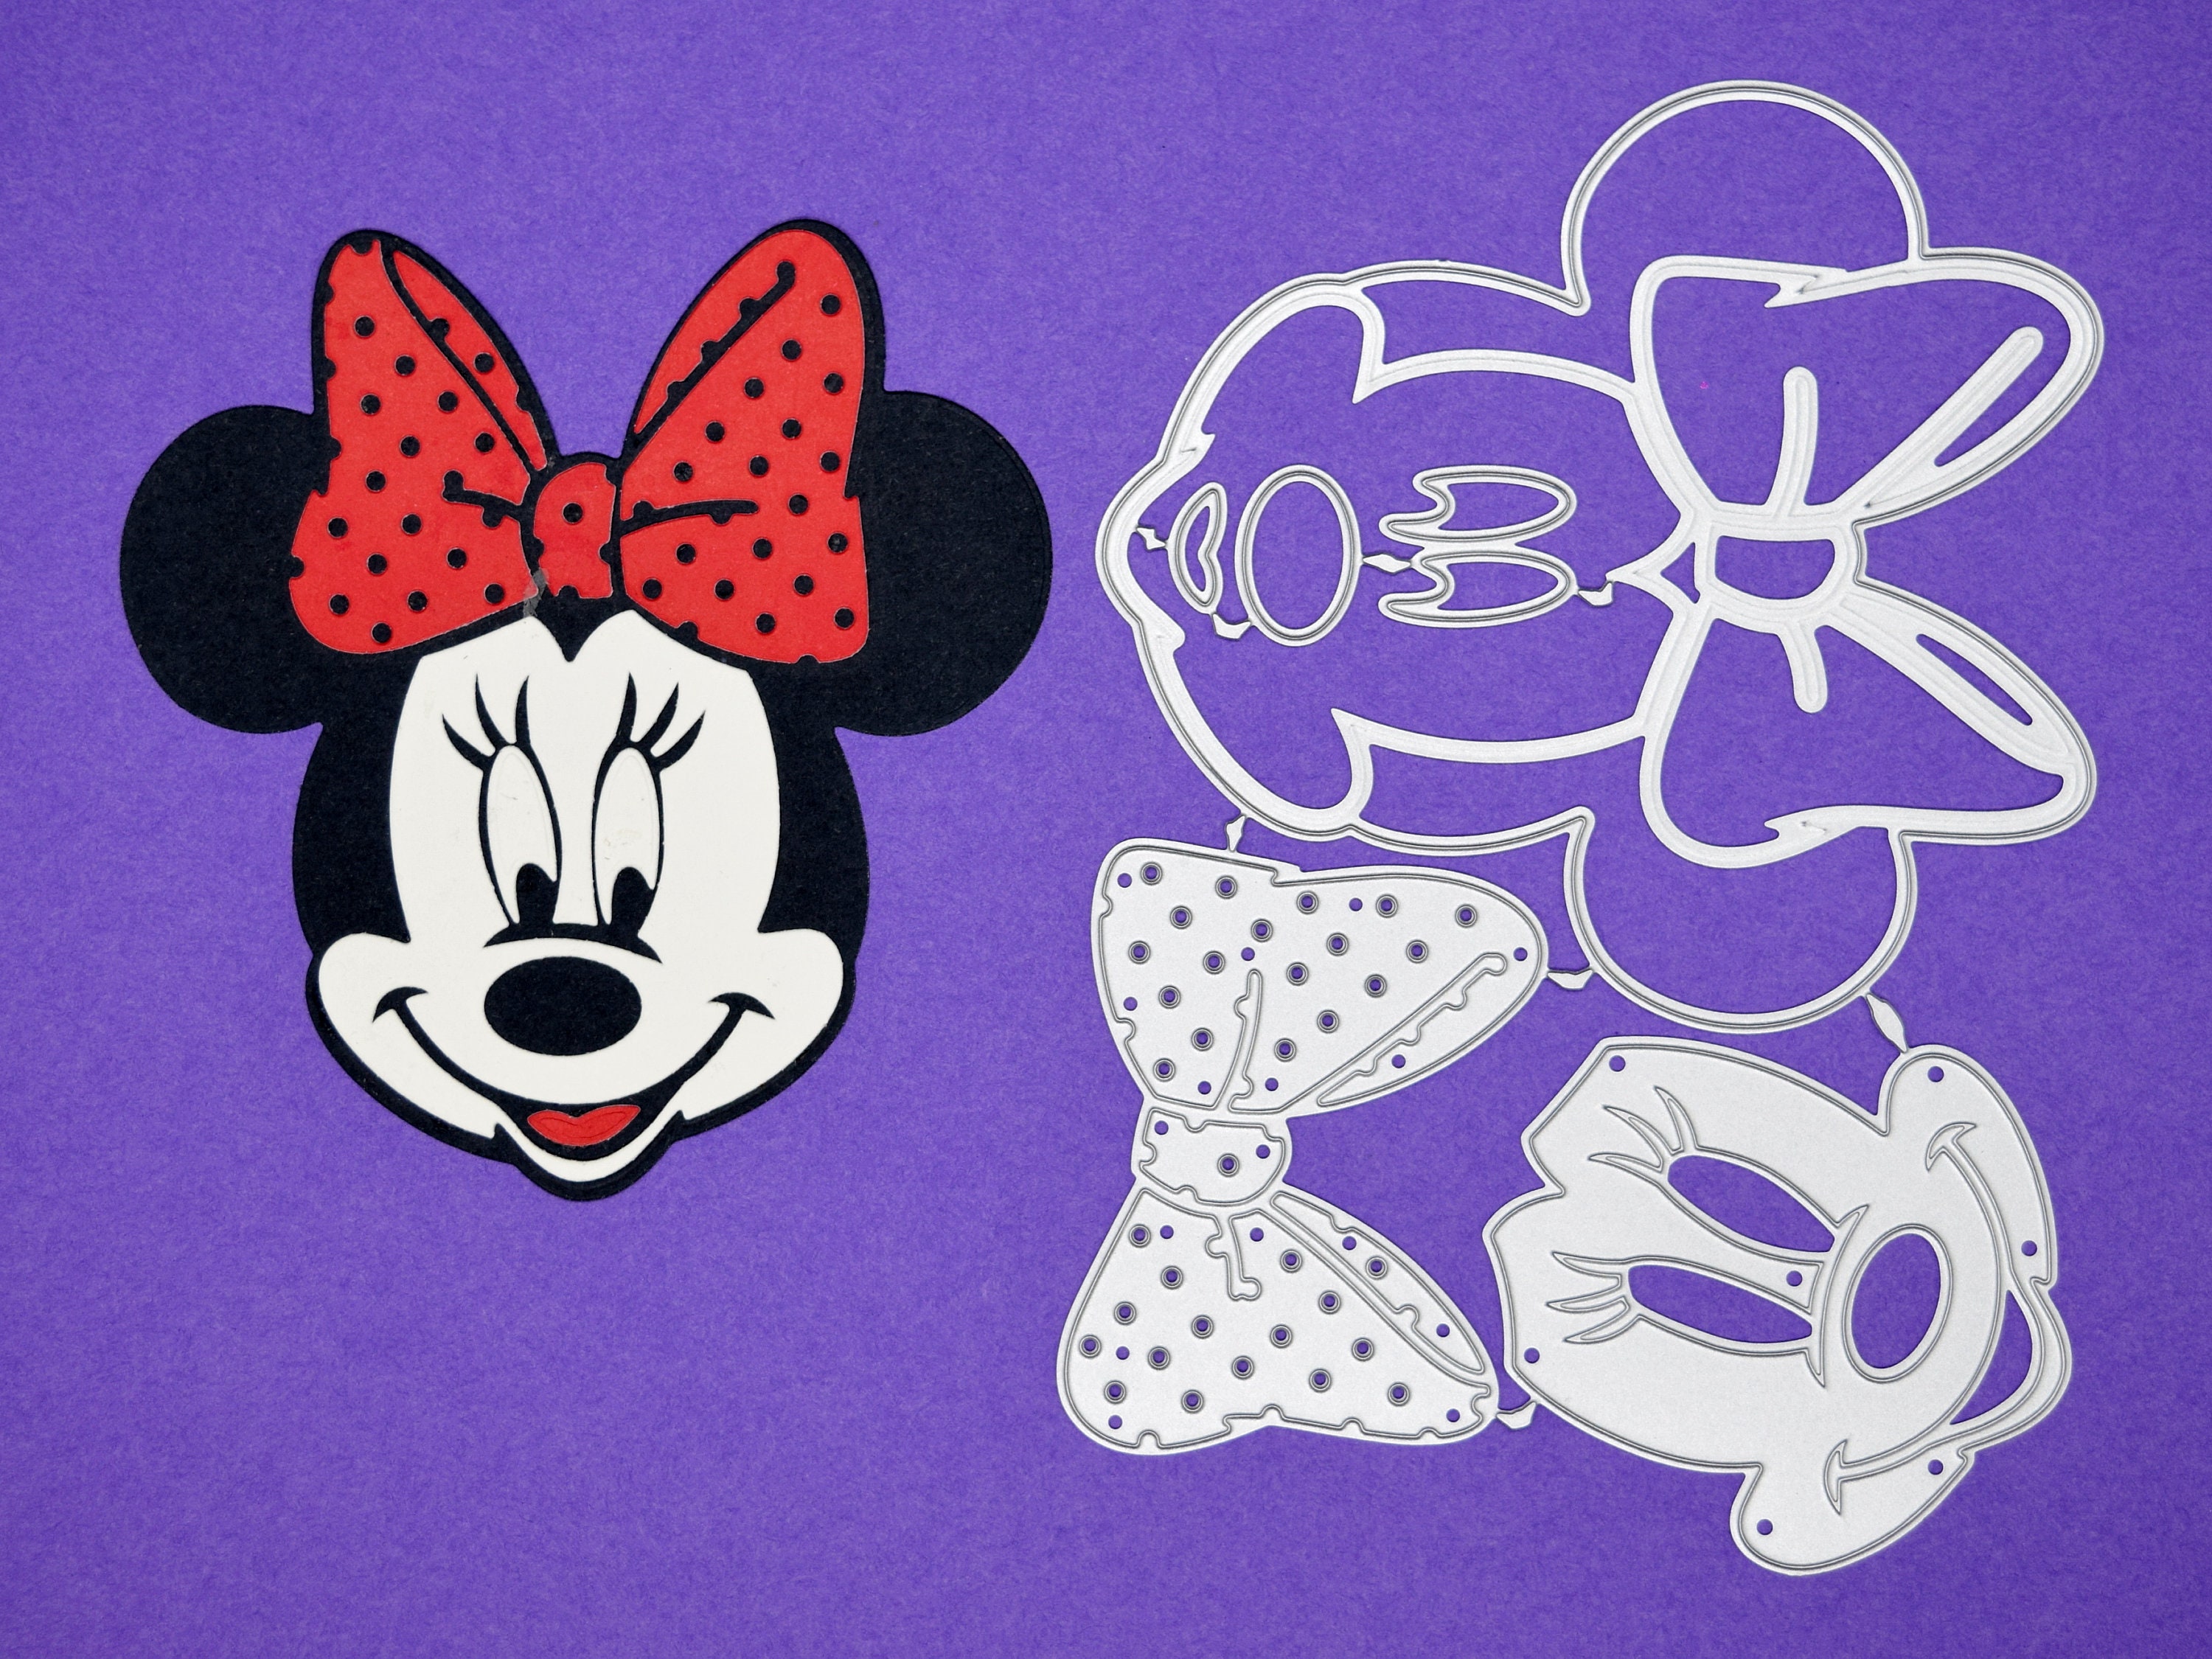 Disney Mickey Mouse & Minnie Mouse Colorblock Die Cut Vinyl Decal Stickers - 8 Pack